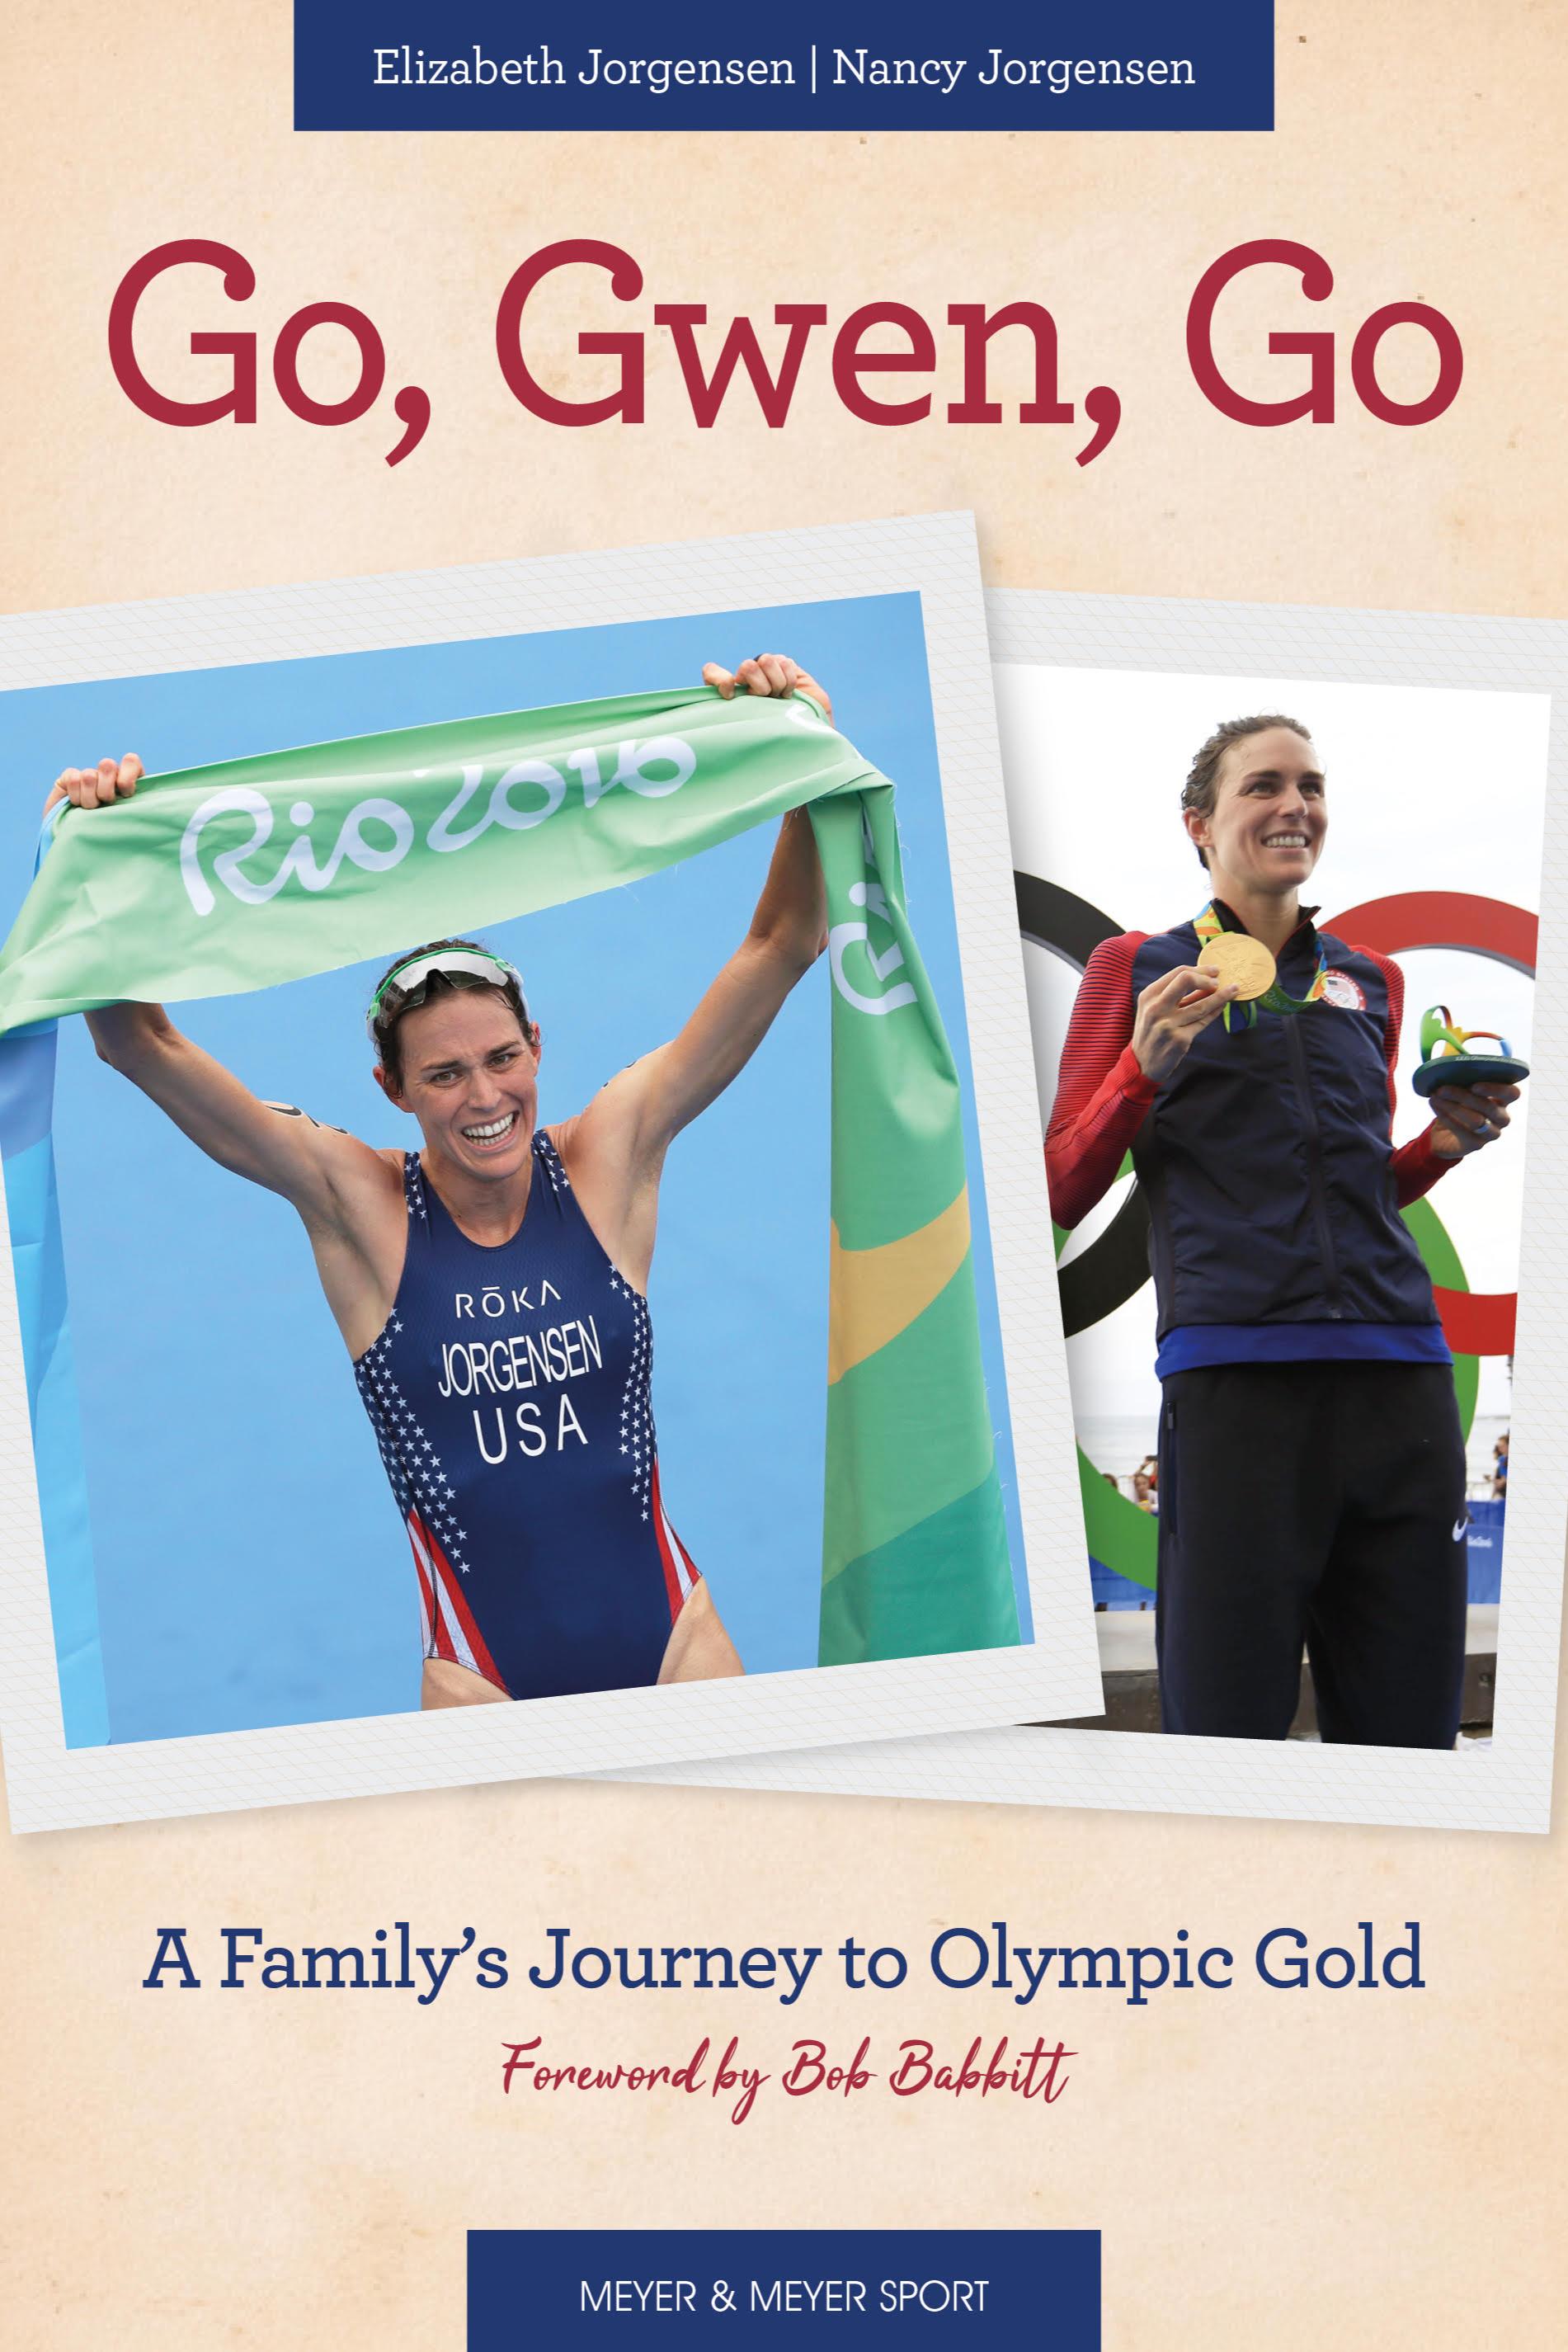 Book cover of Go, Gwen, Go: A Family's Journey to Olympic Gold by nljorgensen